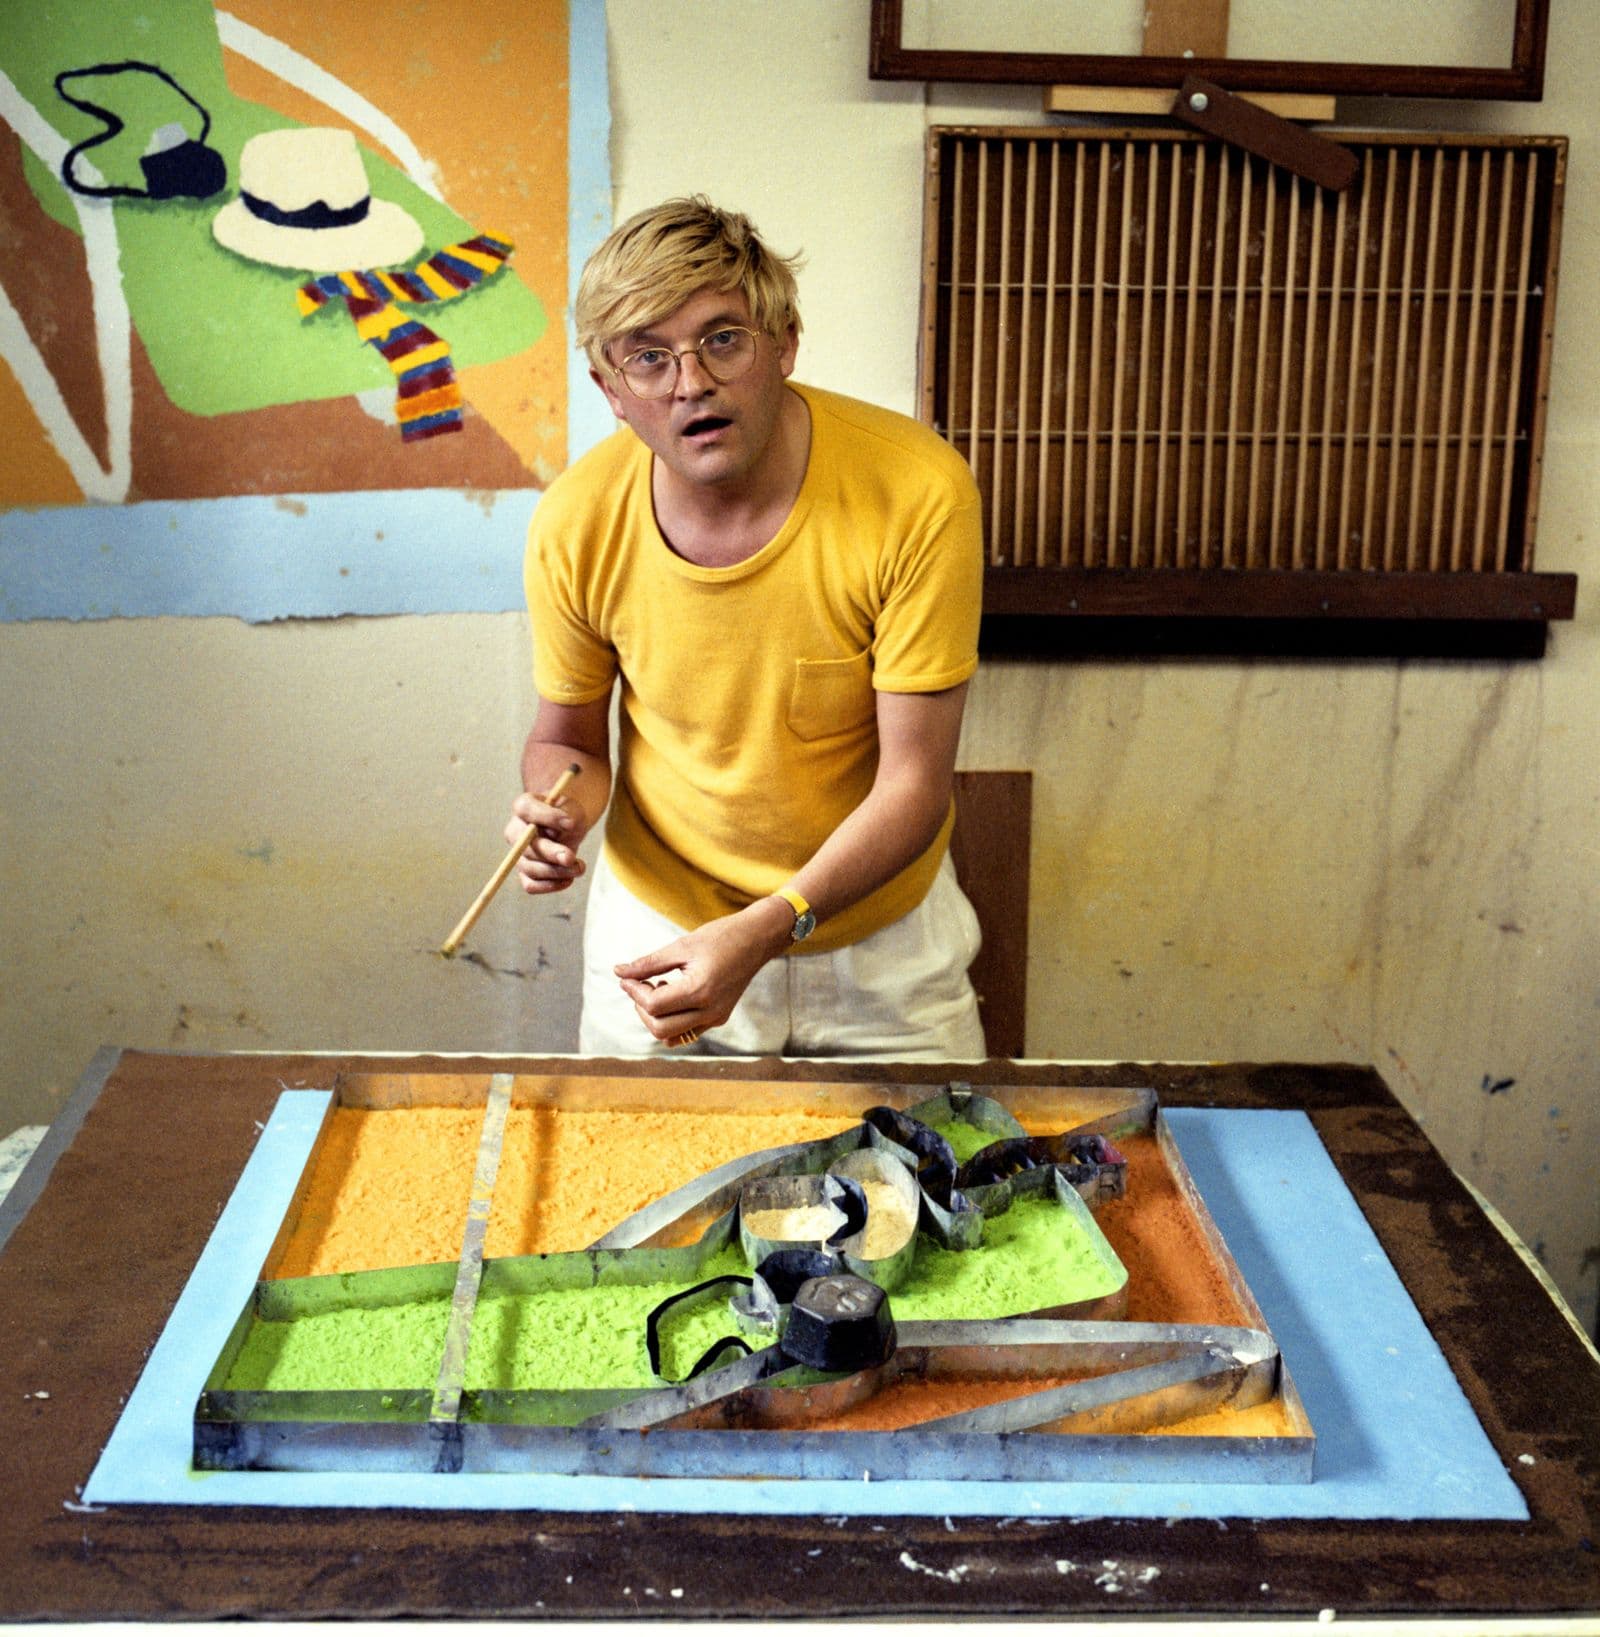 David Hockney pressing colour pulp into a mould for experimental paper pulp work (never published and destroyed) during the 'Paper Pools' series, Tyler Workshop Ltd. paper mill, Bedford Village, New York, 1978.